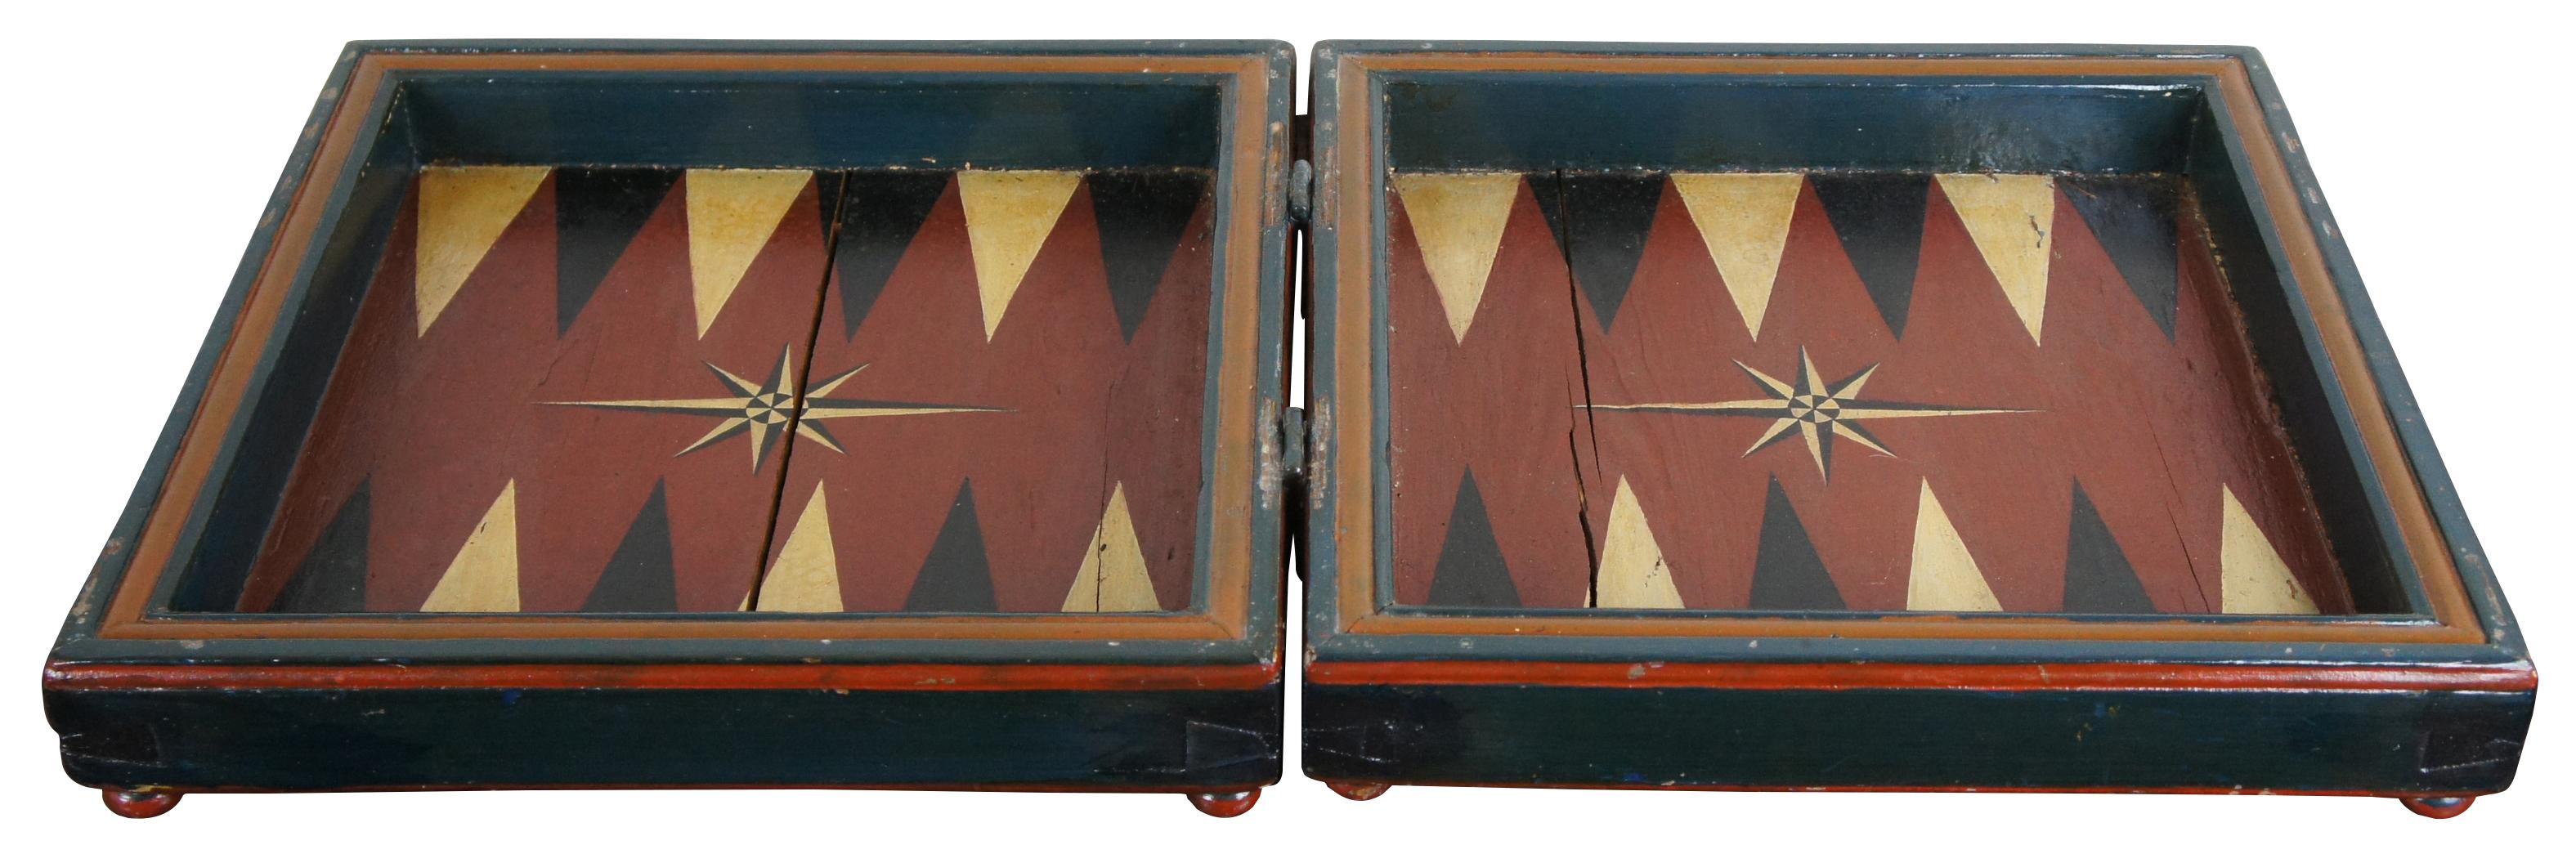 Primitive 19th century antique game board featuring chess, checkers, backgammon and nine man morris. The board is hand painted and detailed anno 1817, footed on both sides with bun feet and opens to backgammon playing surface. Measure: 17